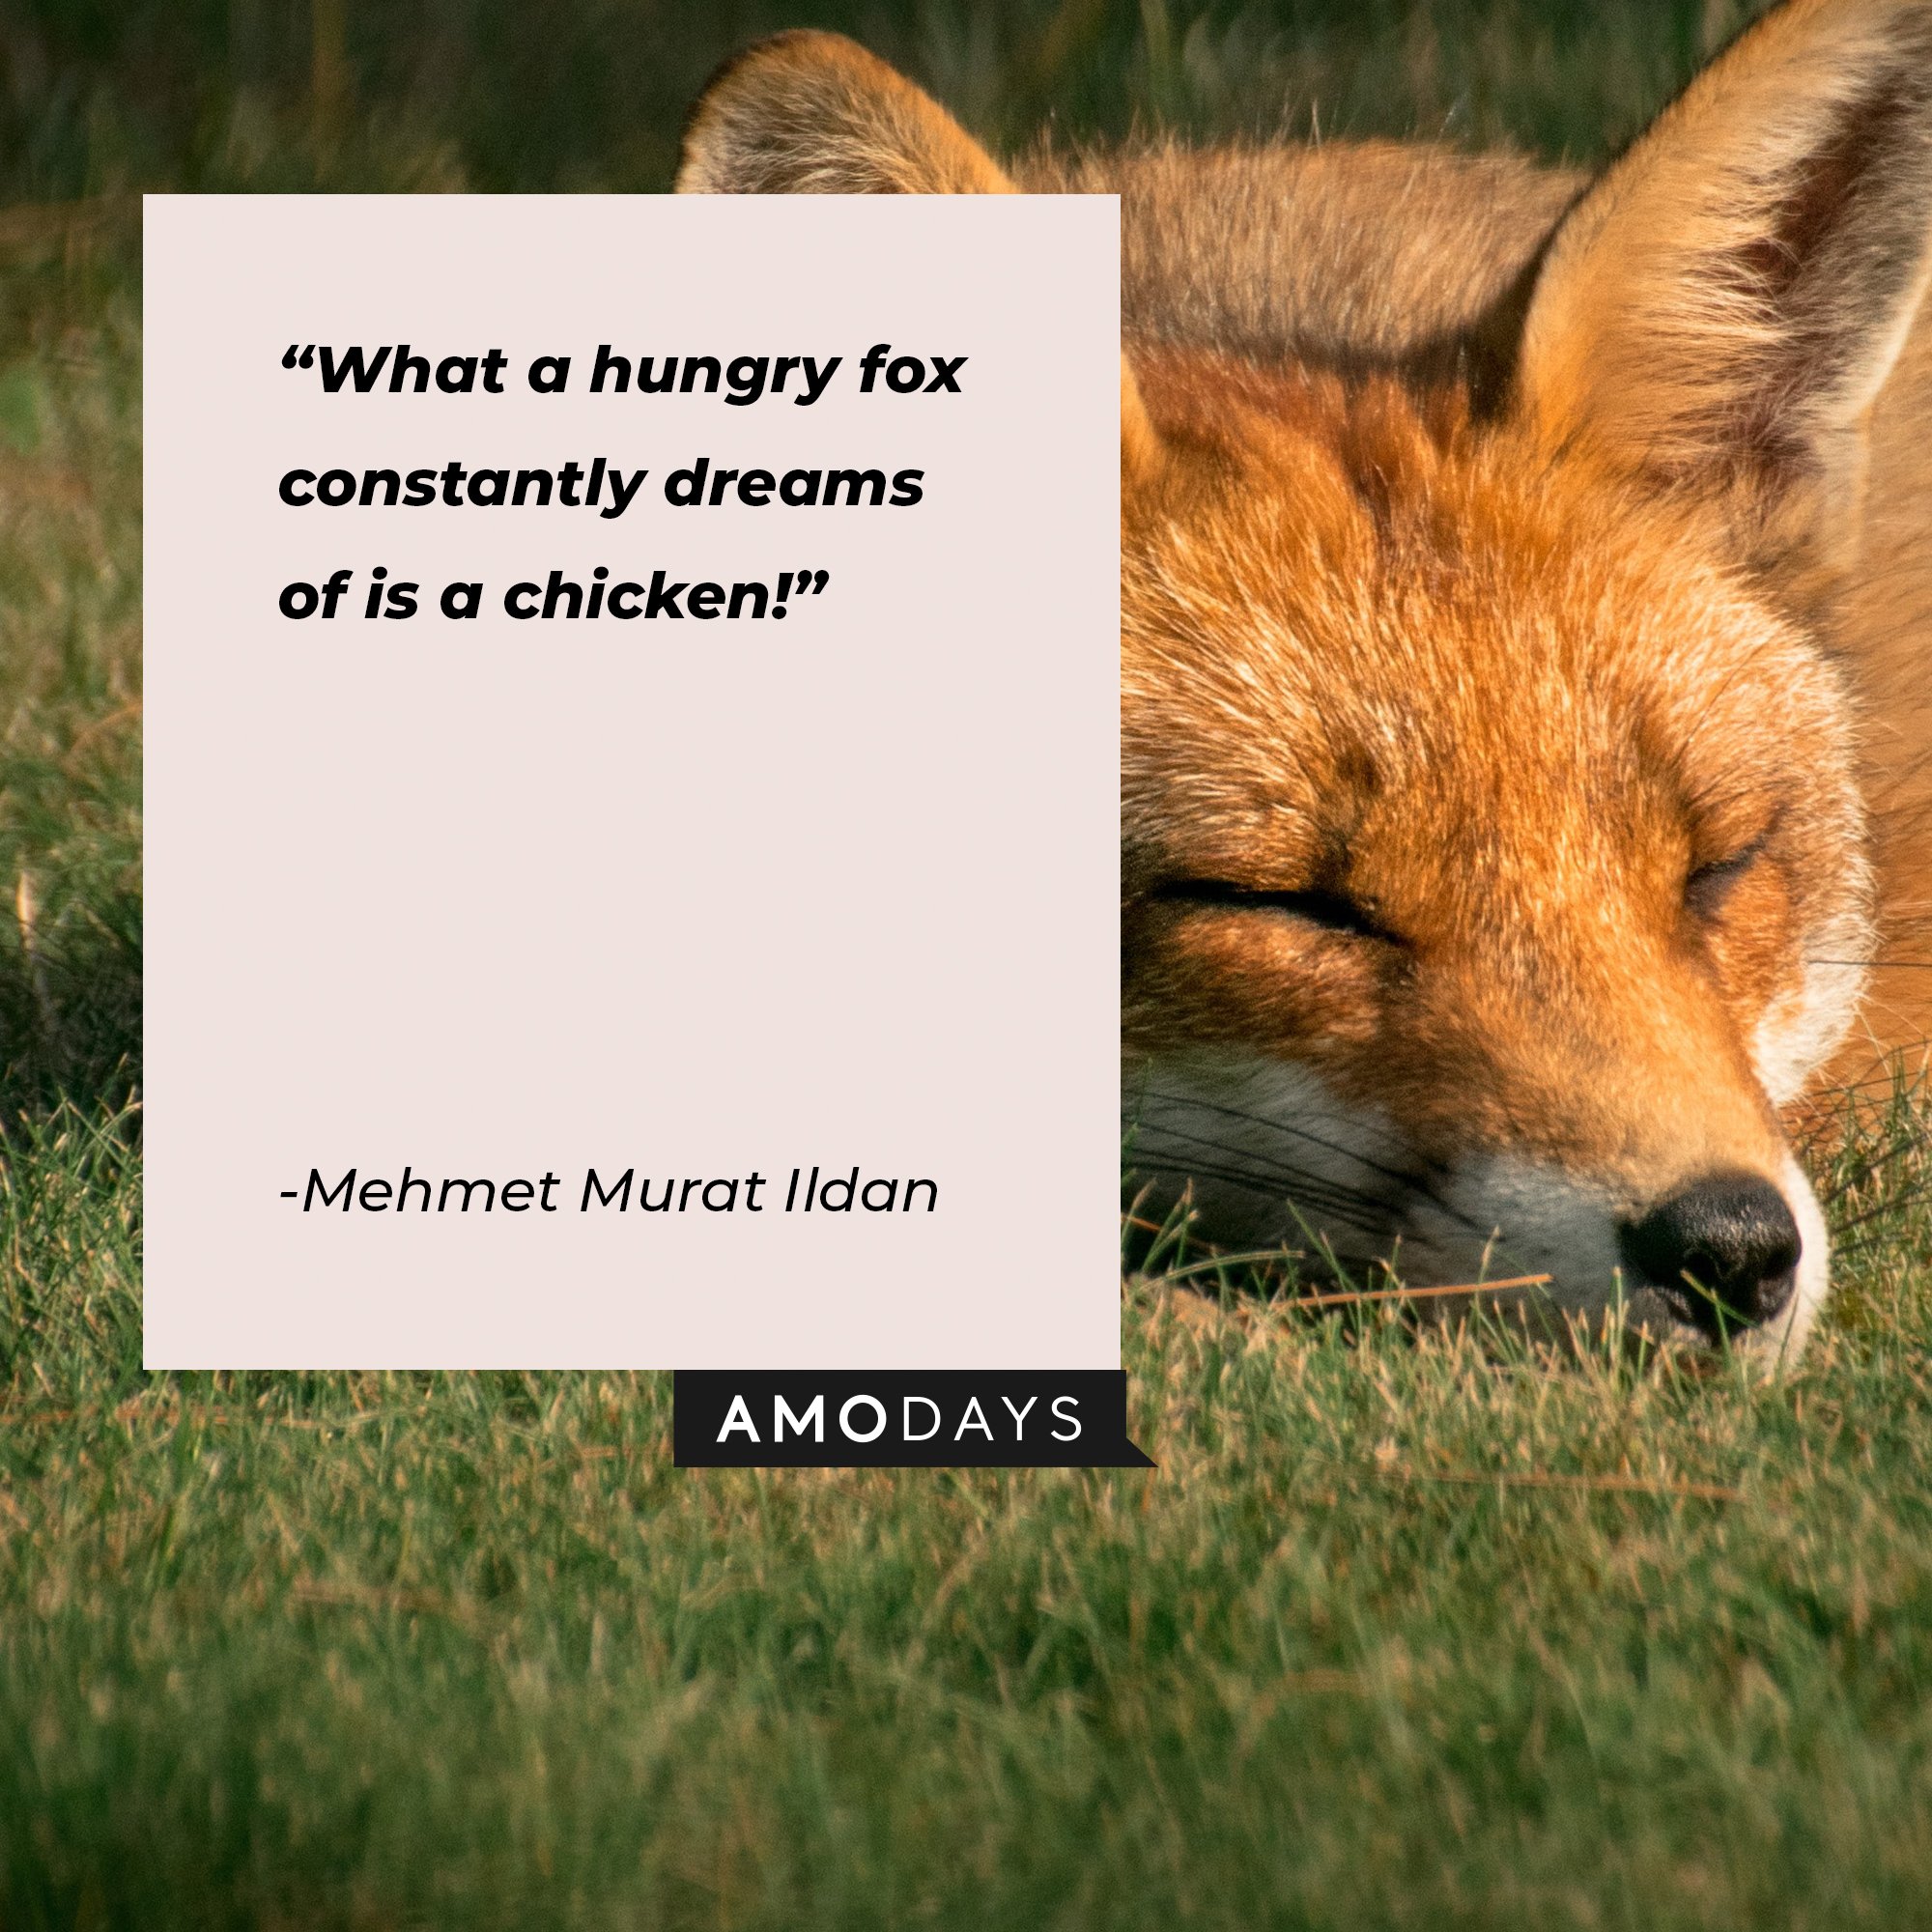 Mehmet Murat Ildan’s quote: "What a hungry fox constantly dreams of is a chicken!” | Image: AmoDays